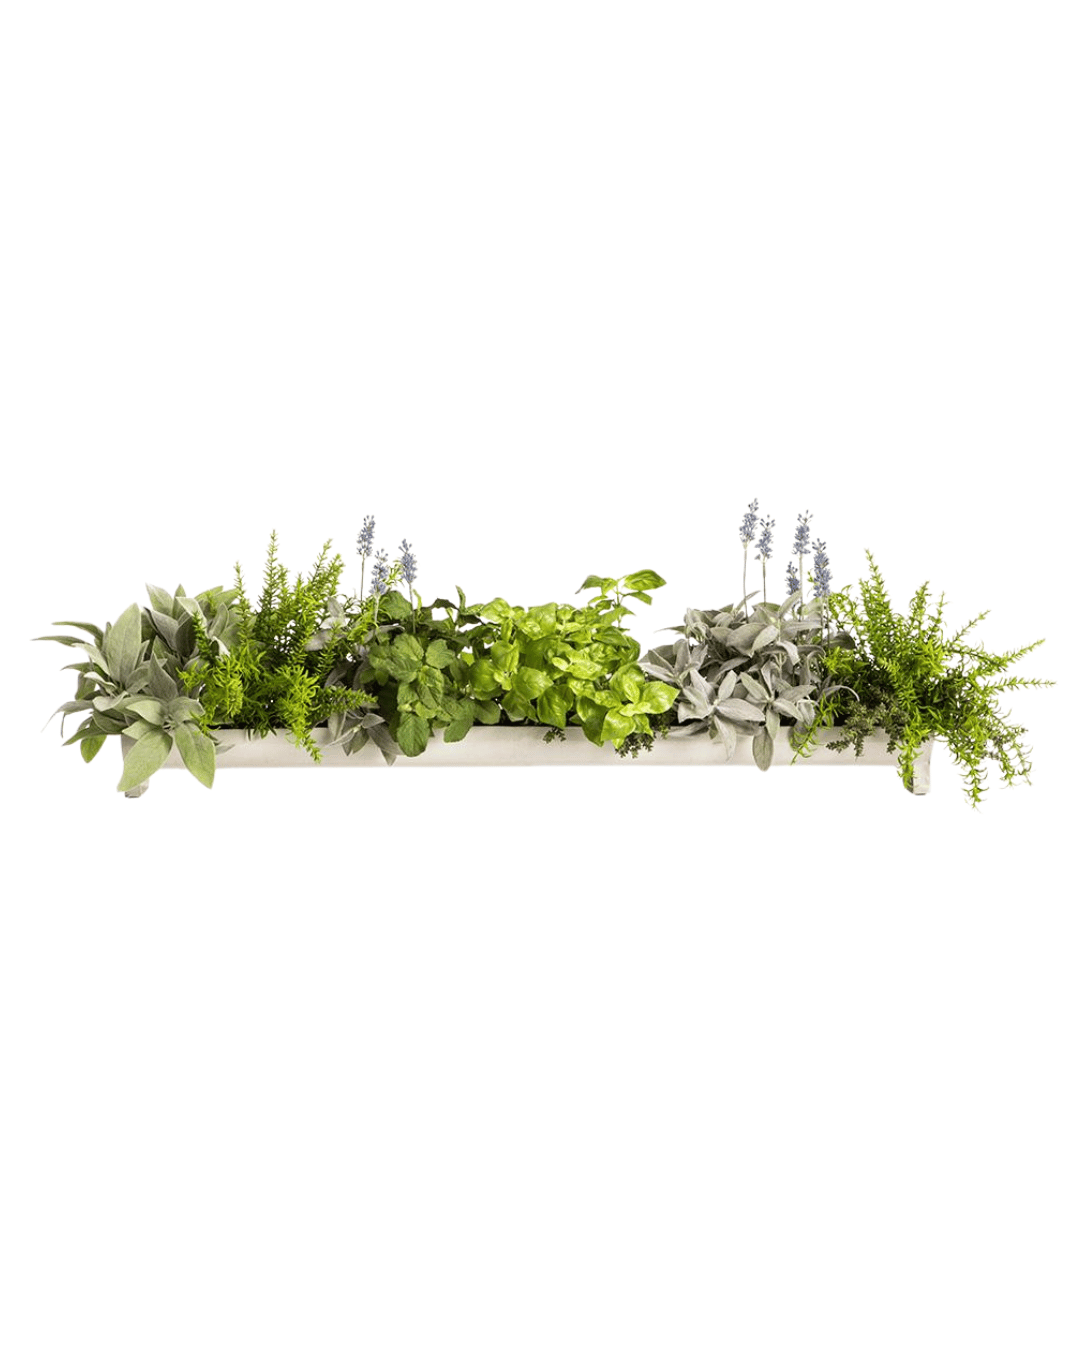 A horizontal arrangement of AllState Floral And Craft's 13" Sage/Mint/Lavender with different textures and shades, isolated on a white background in Scottsdale, Arizona.